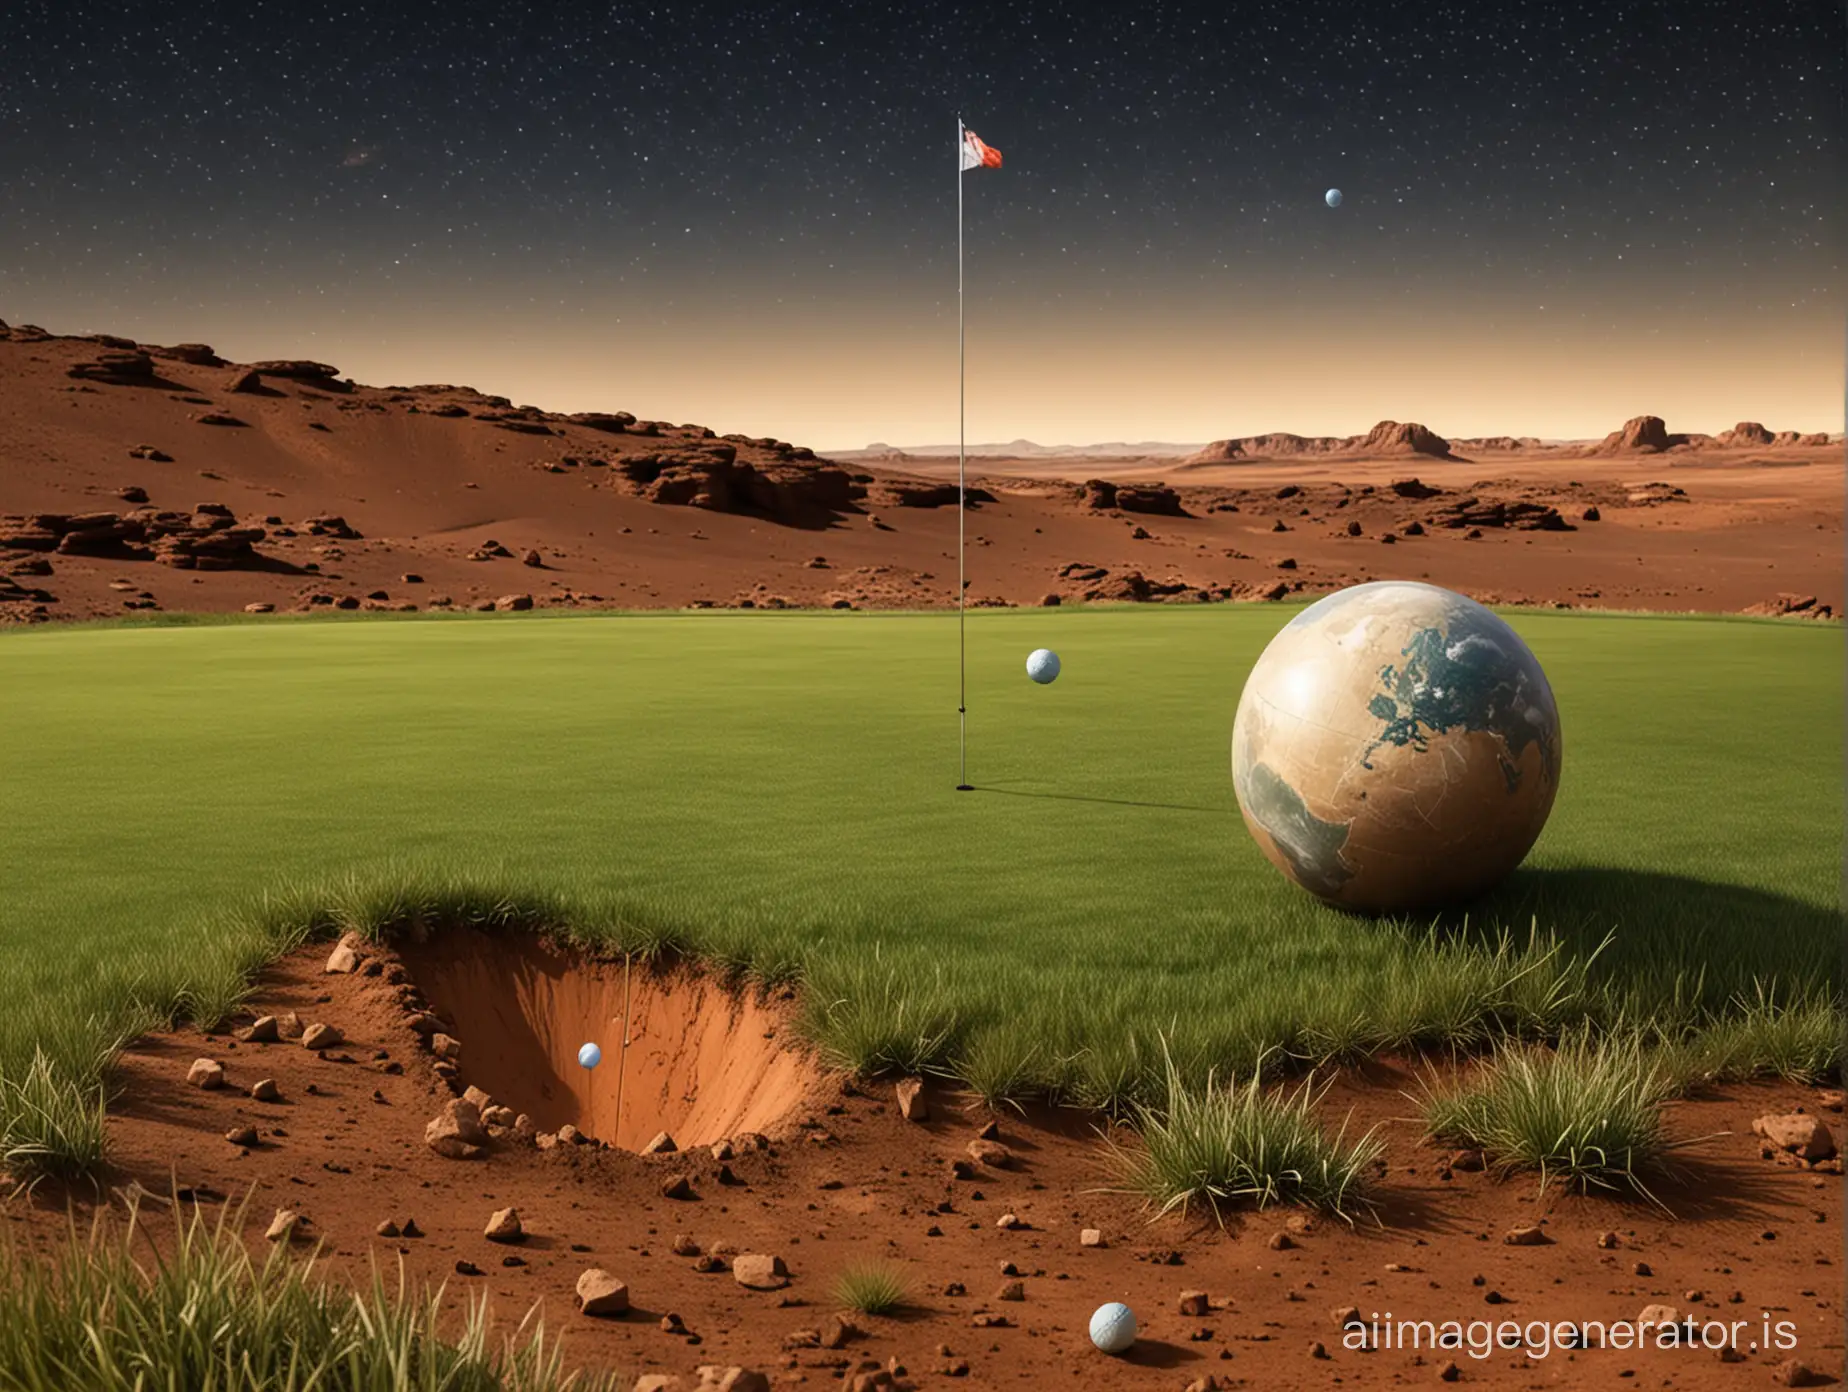 Golfer on a small patch of grass teeing-off on Mars with the stars and a globe earth in the sky in the background